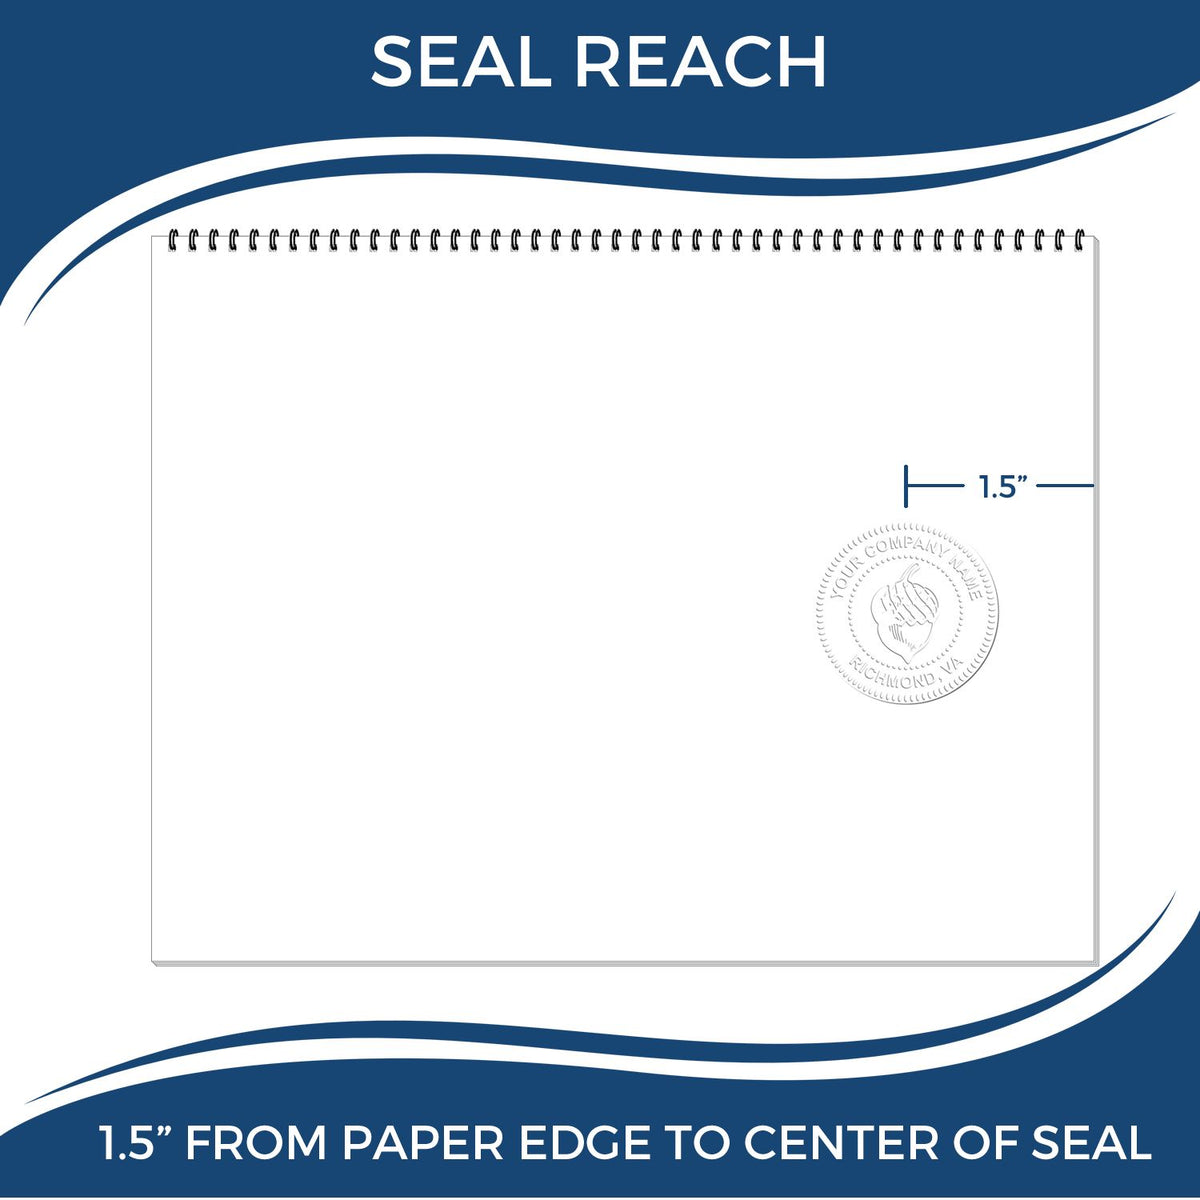 An infographic showing the seal reach which is represented by a ruler and a miniature seal image of the Handheld South Dakota Professional Geologist Embosser